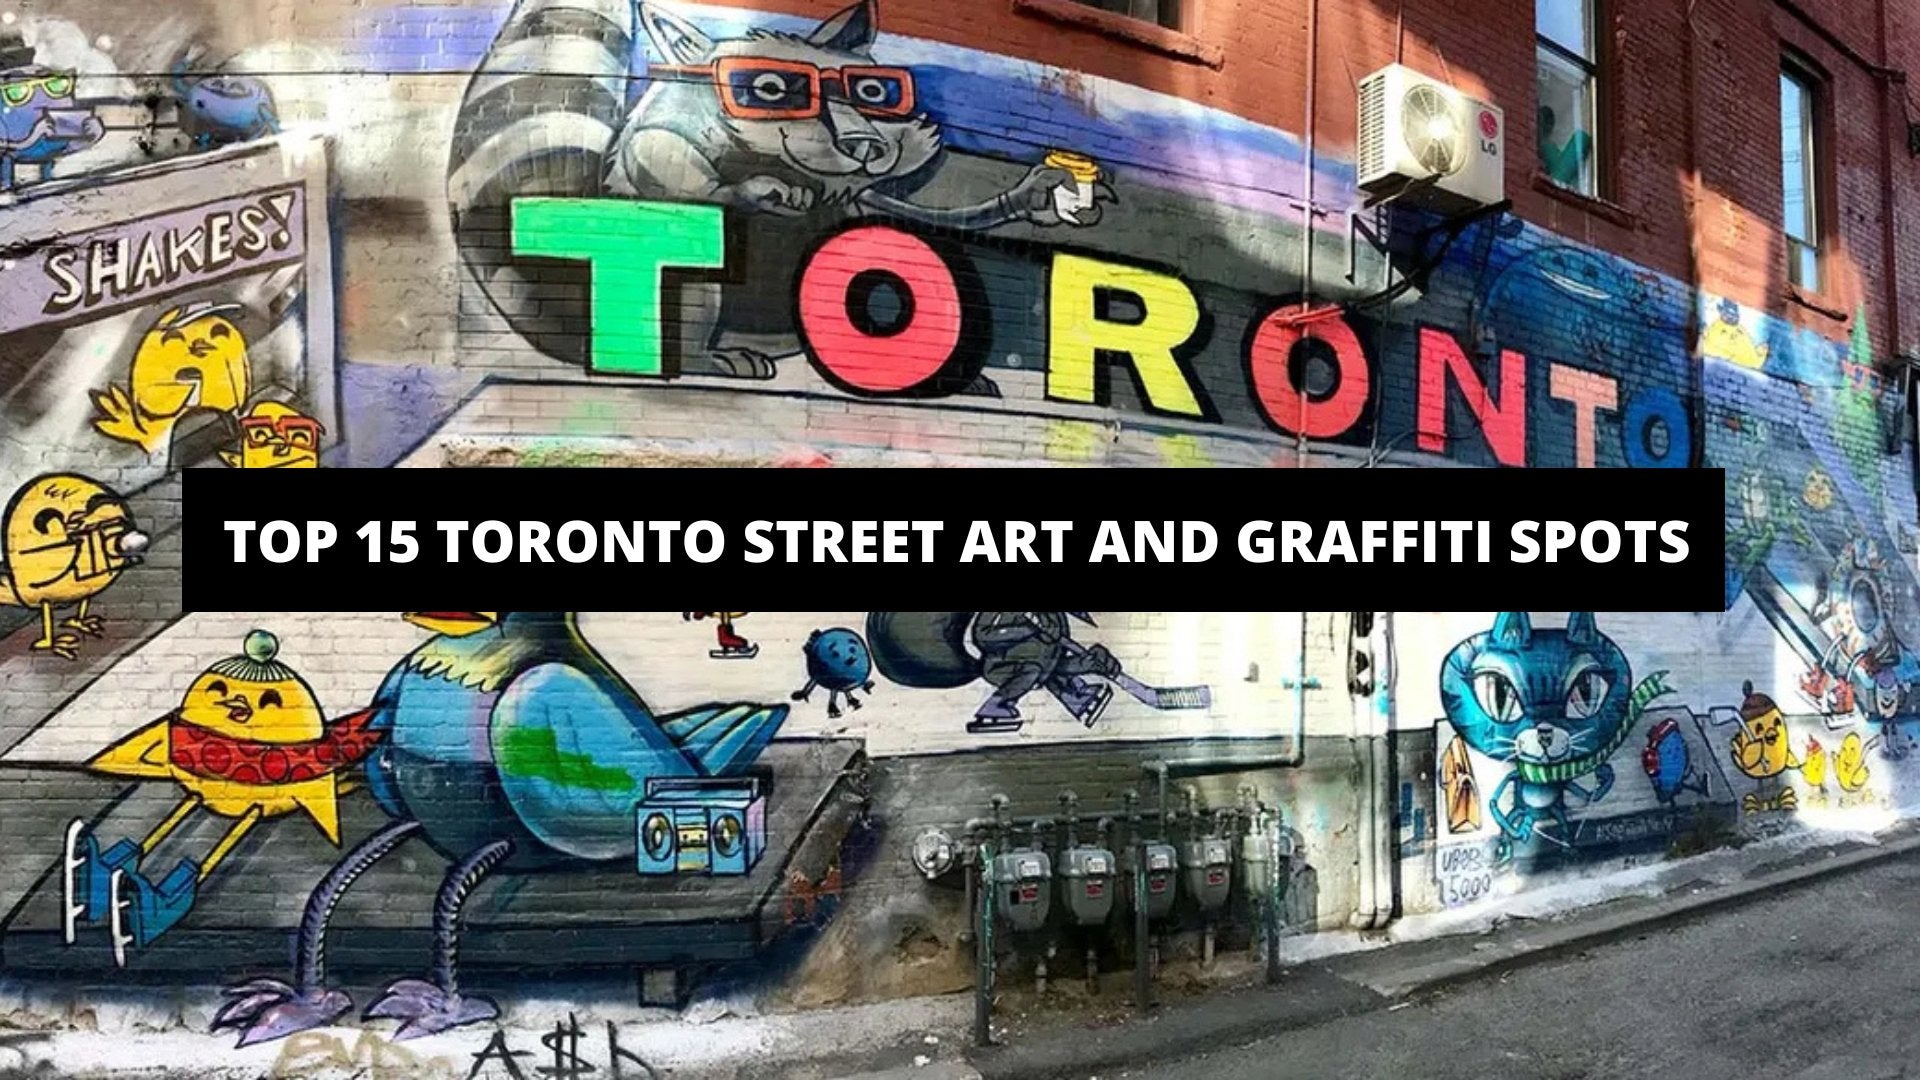 Why are the graffiti characters important for some street art artists?